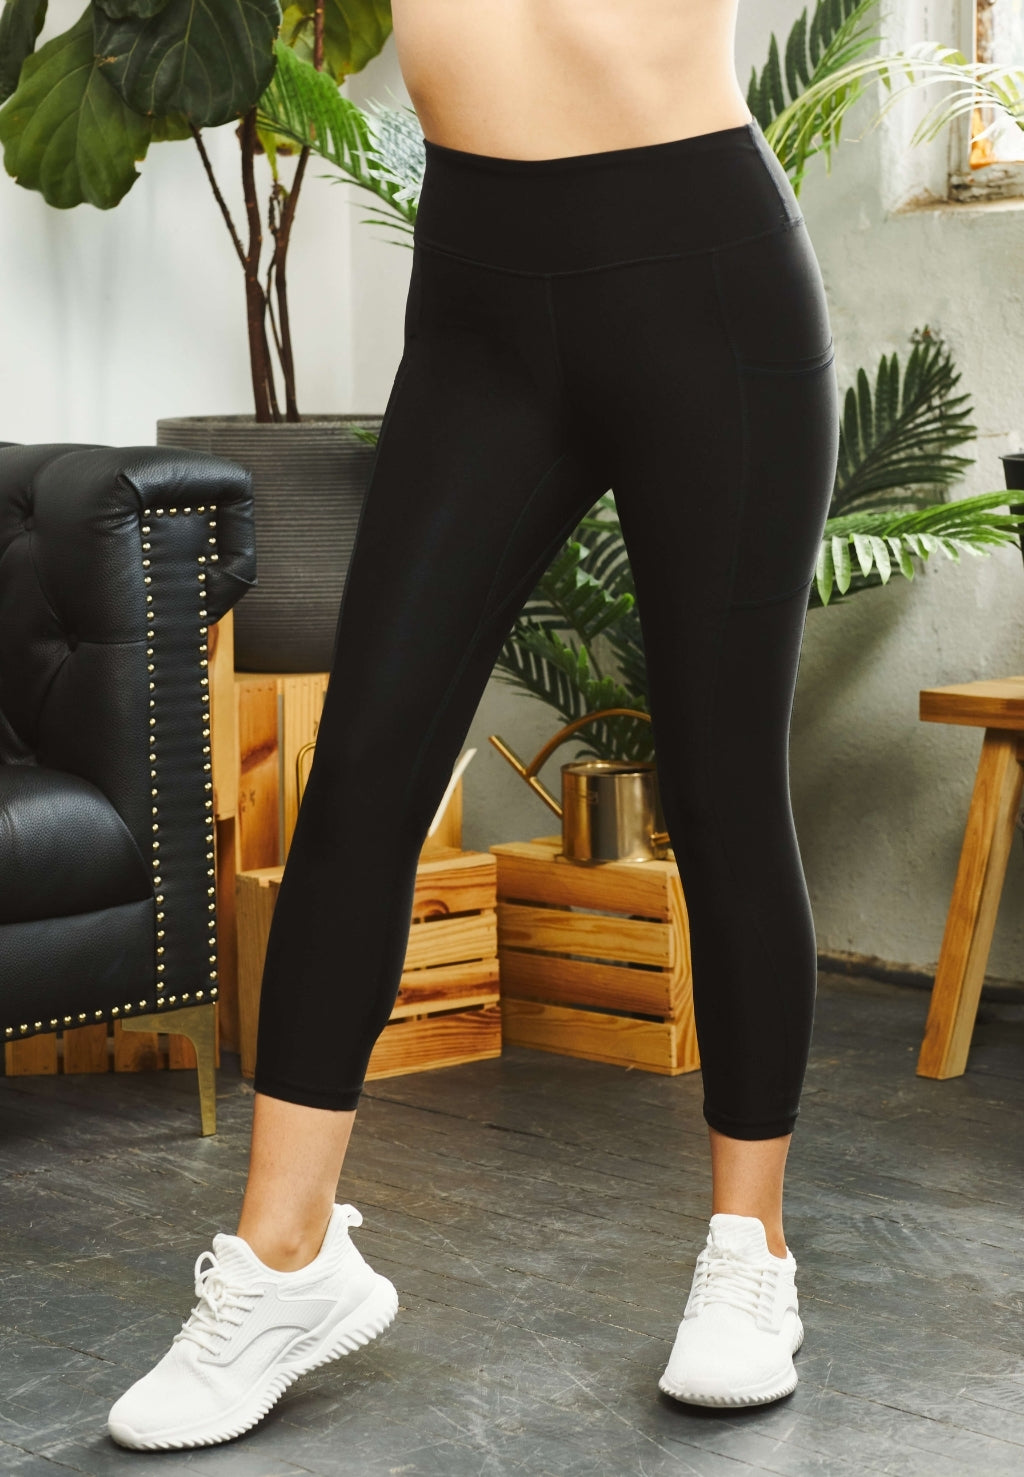 swee Glory High Waist & Full Thigh Women Shapewear - Buy Nude, Black swee  Glory High Waist & Full Thigh Women Shapewear Online at Best Prices in  India